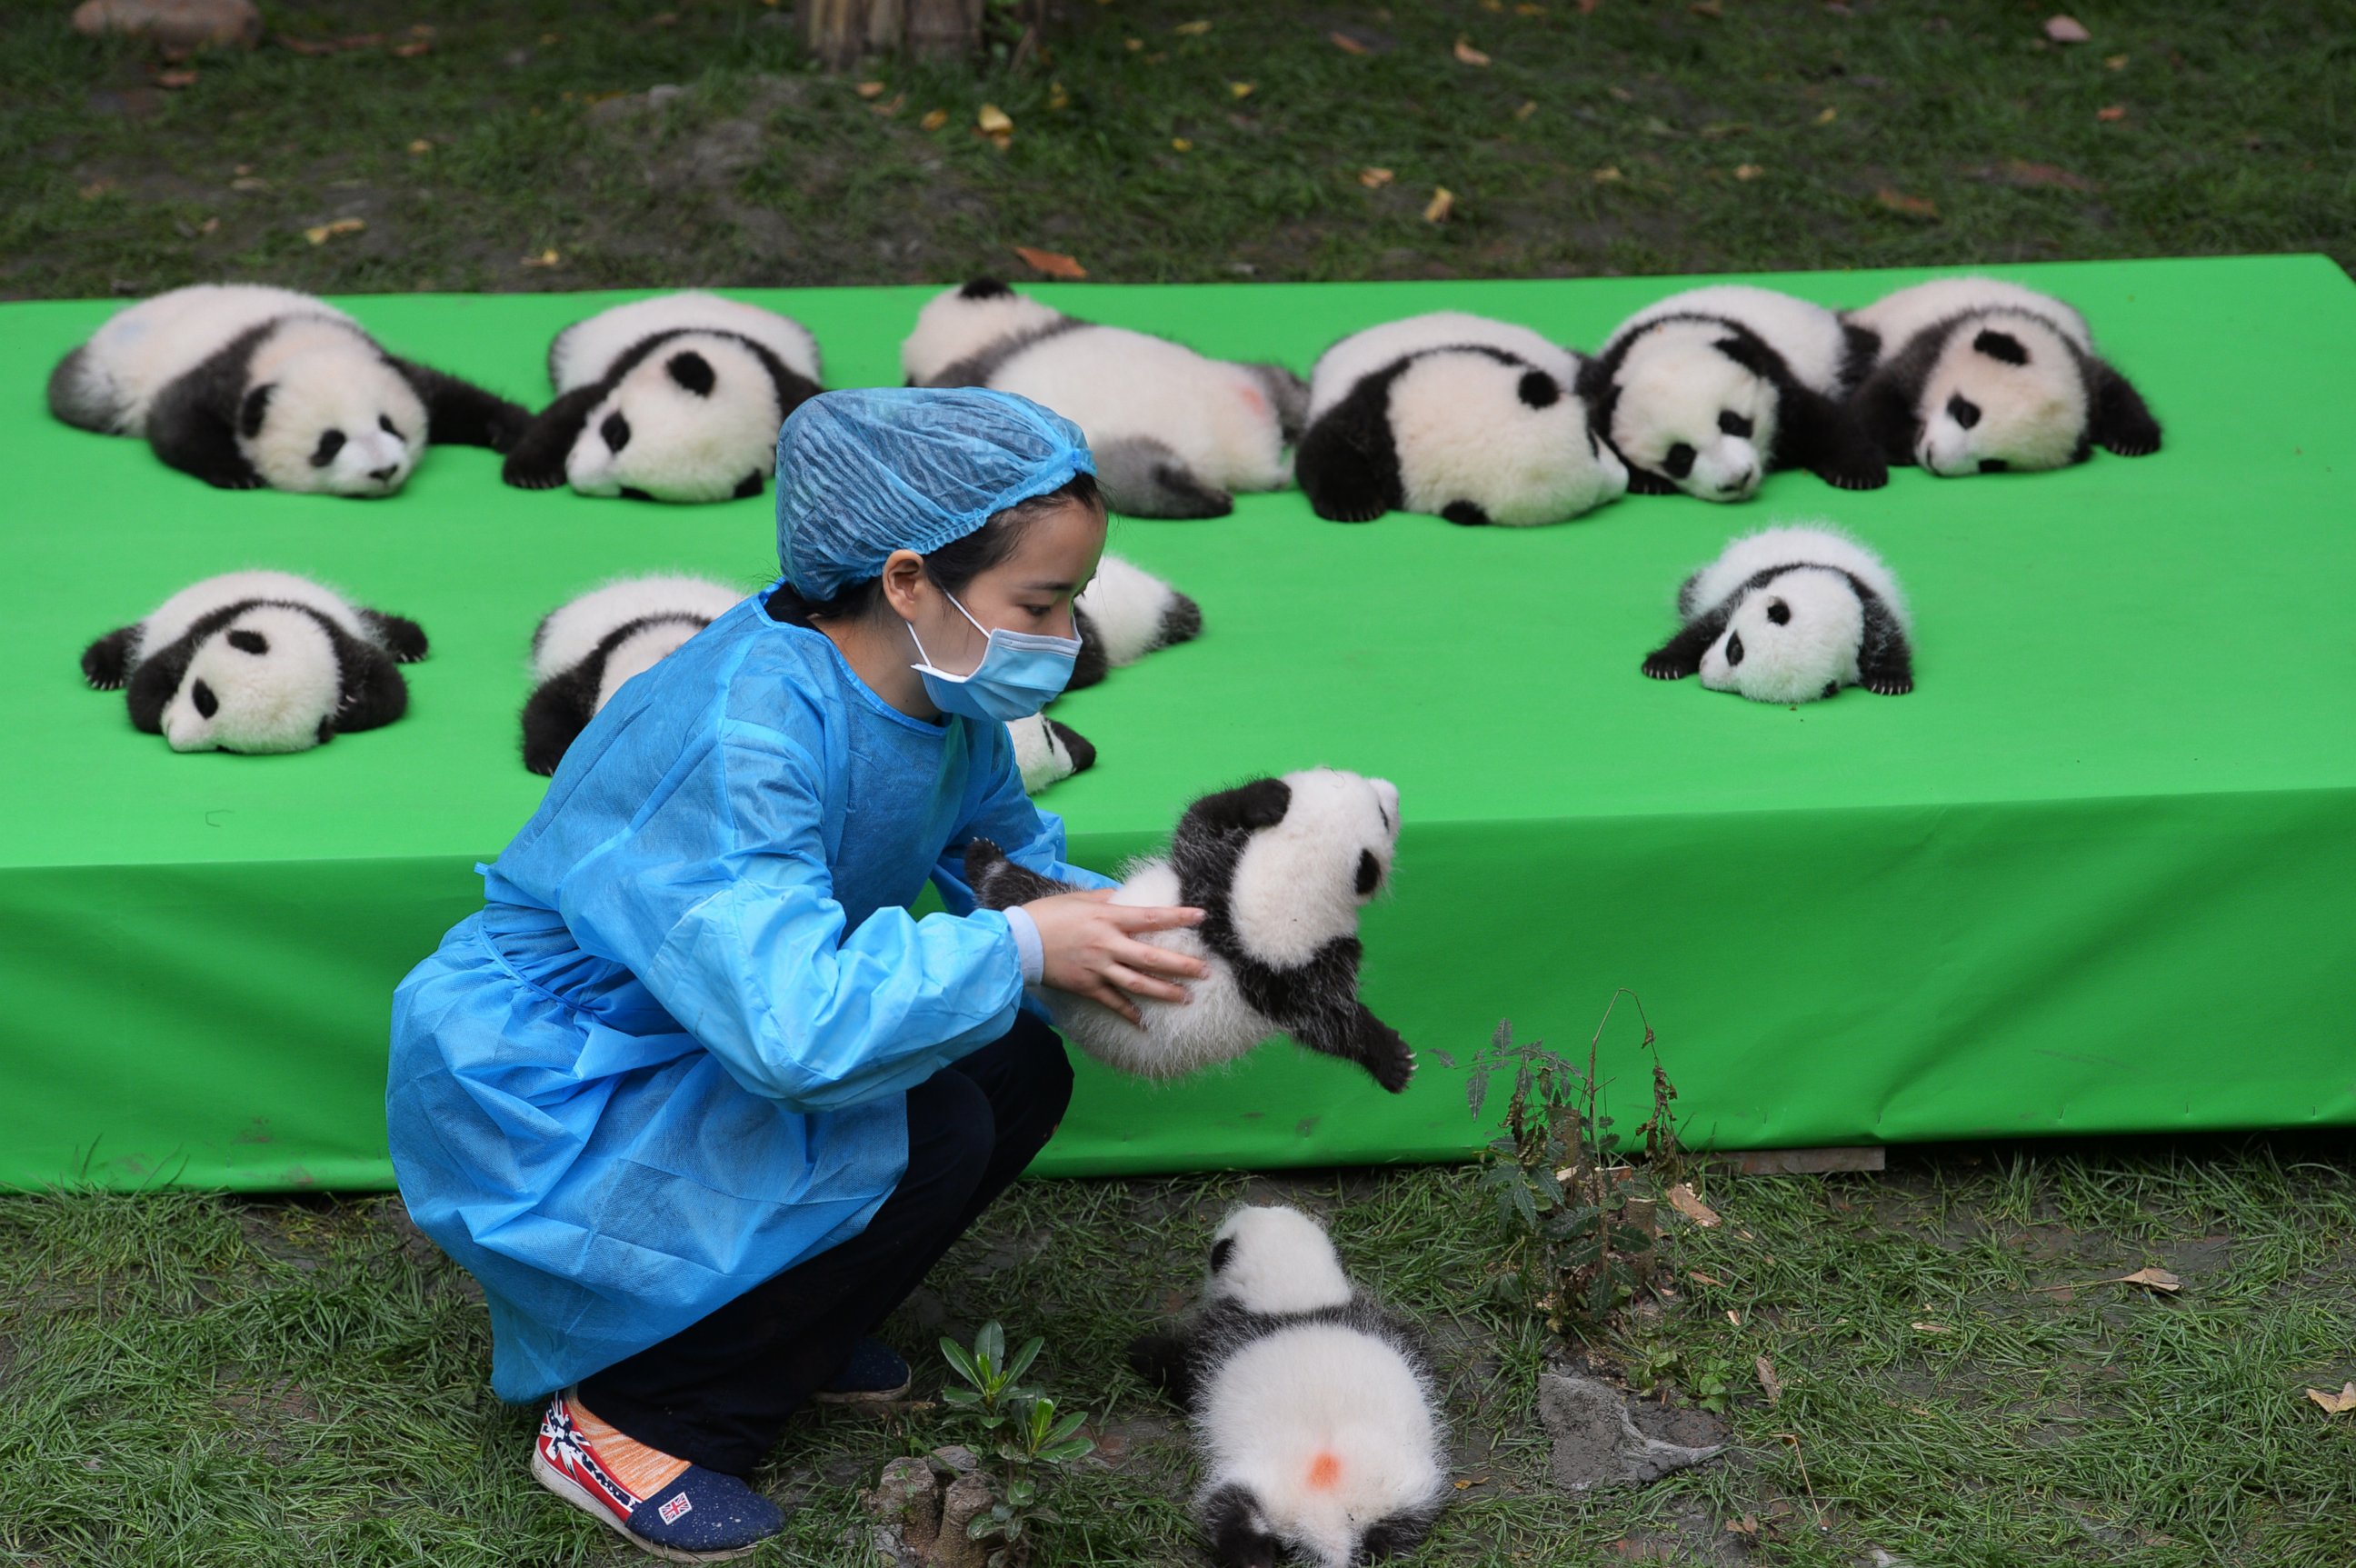 PHOTO: The 23 giant panda cubs born in 2016 at the Chengdu Research Base of Giant Panda Breeding make their debut to the public on Sept. 29, 2016 in Chengdu, China.